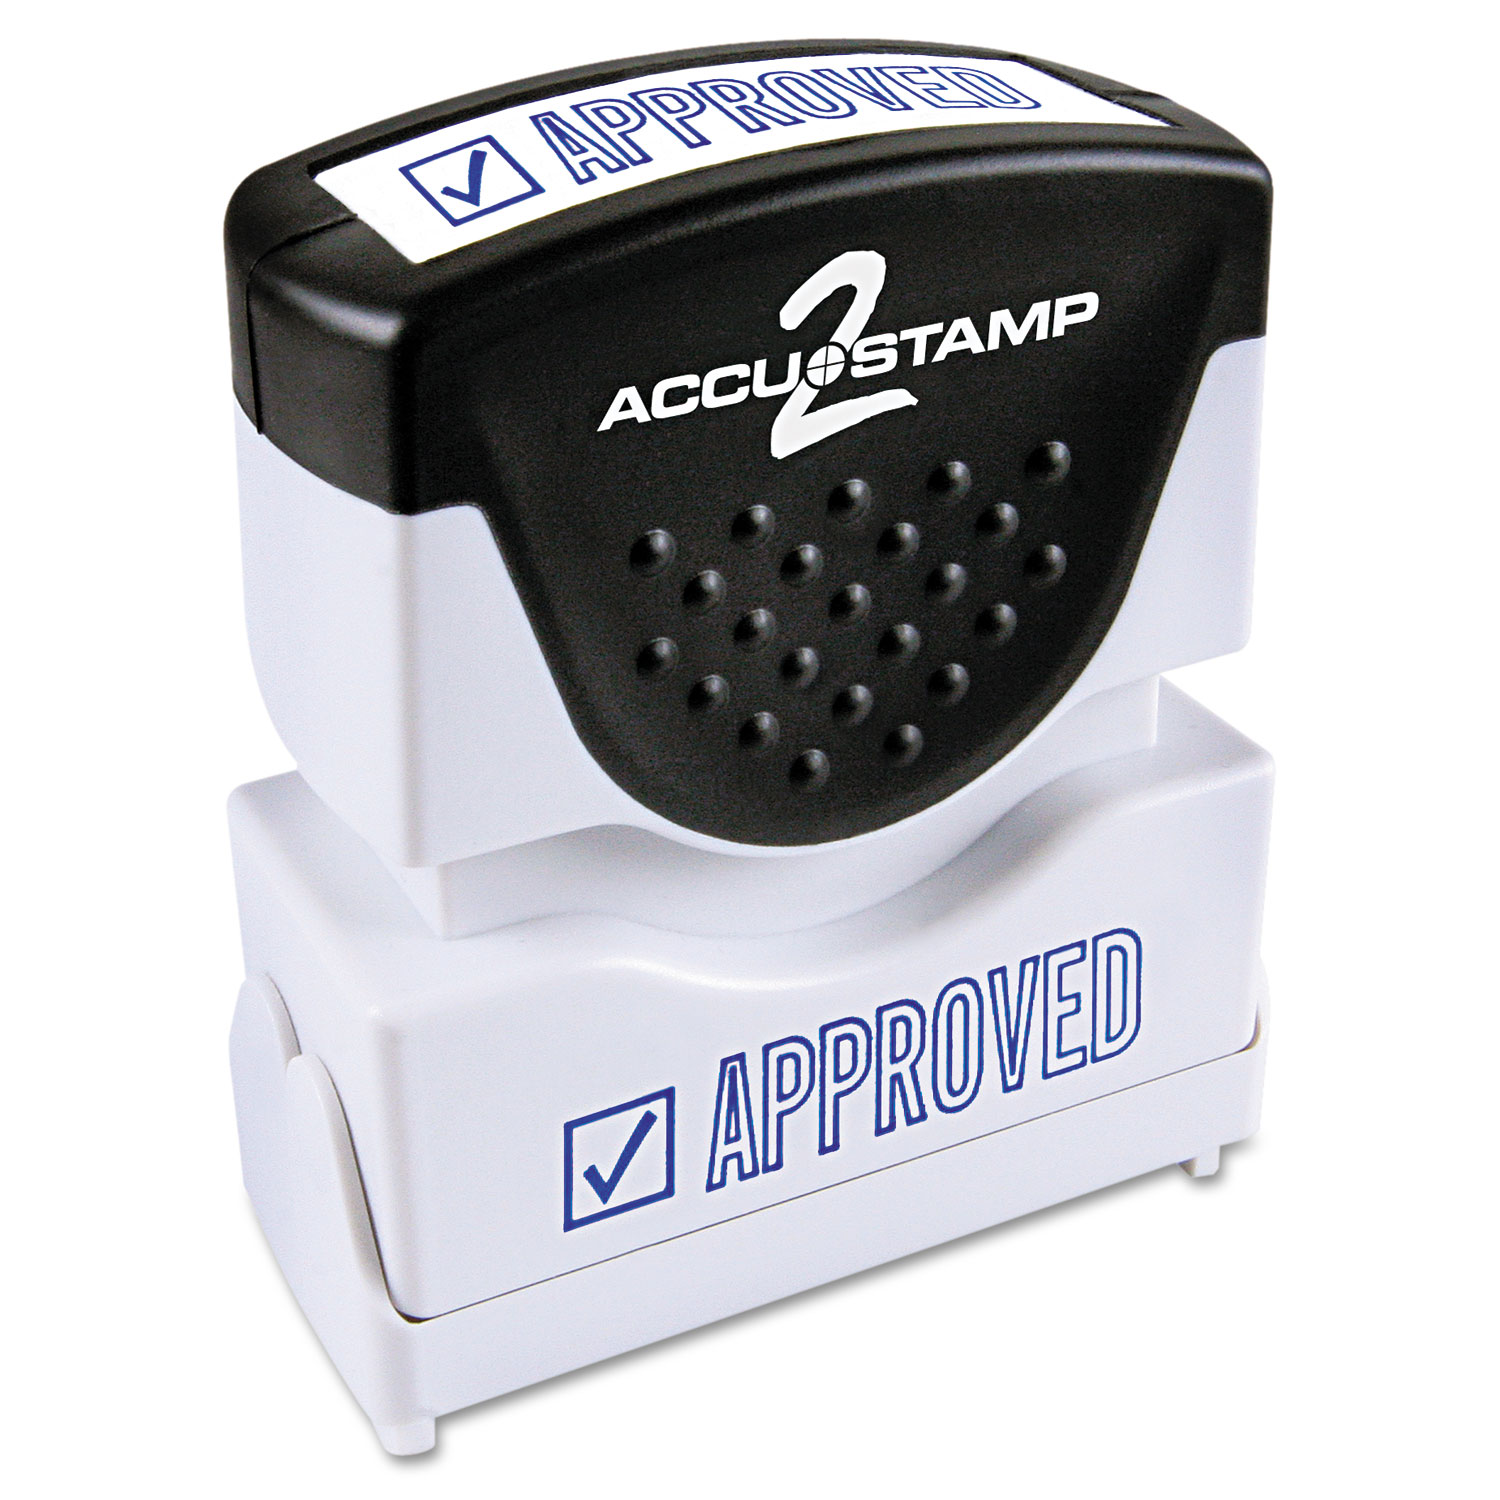  ACCUSTAMP2 035575 Pre-Inked Shutter Stamp, Blue, APPROVED, 1 5/8 x 1/2 (COS035575) 